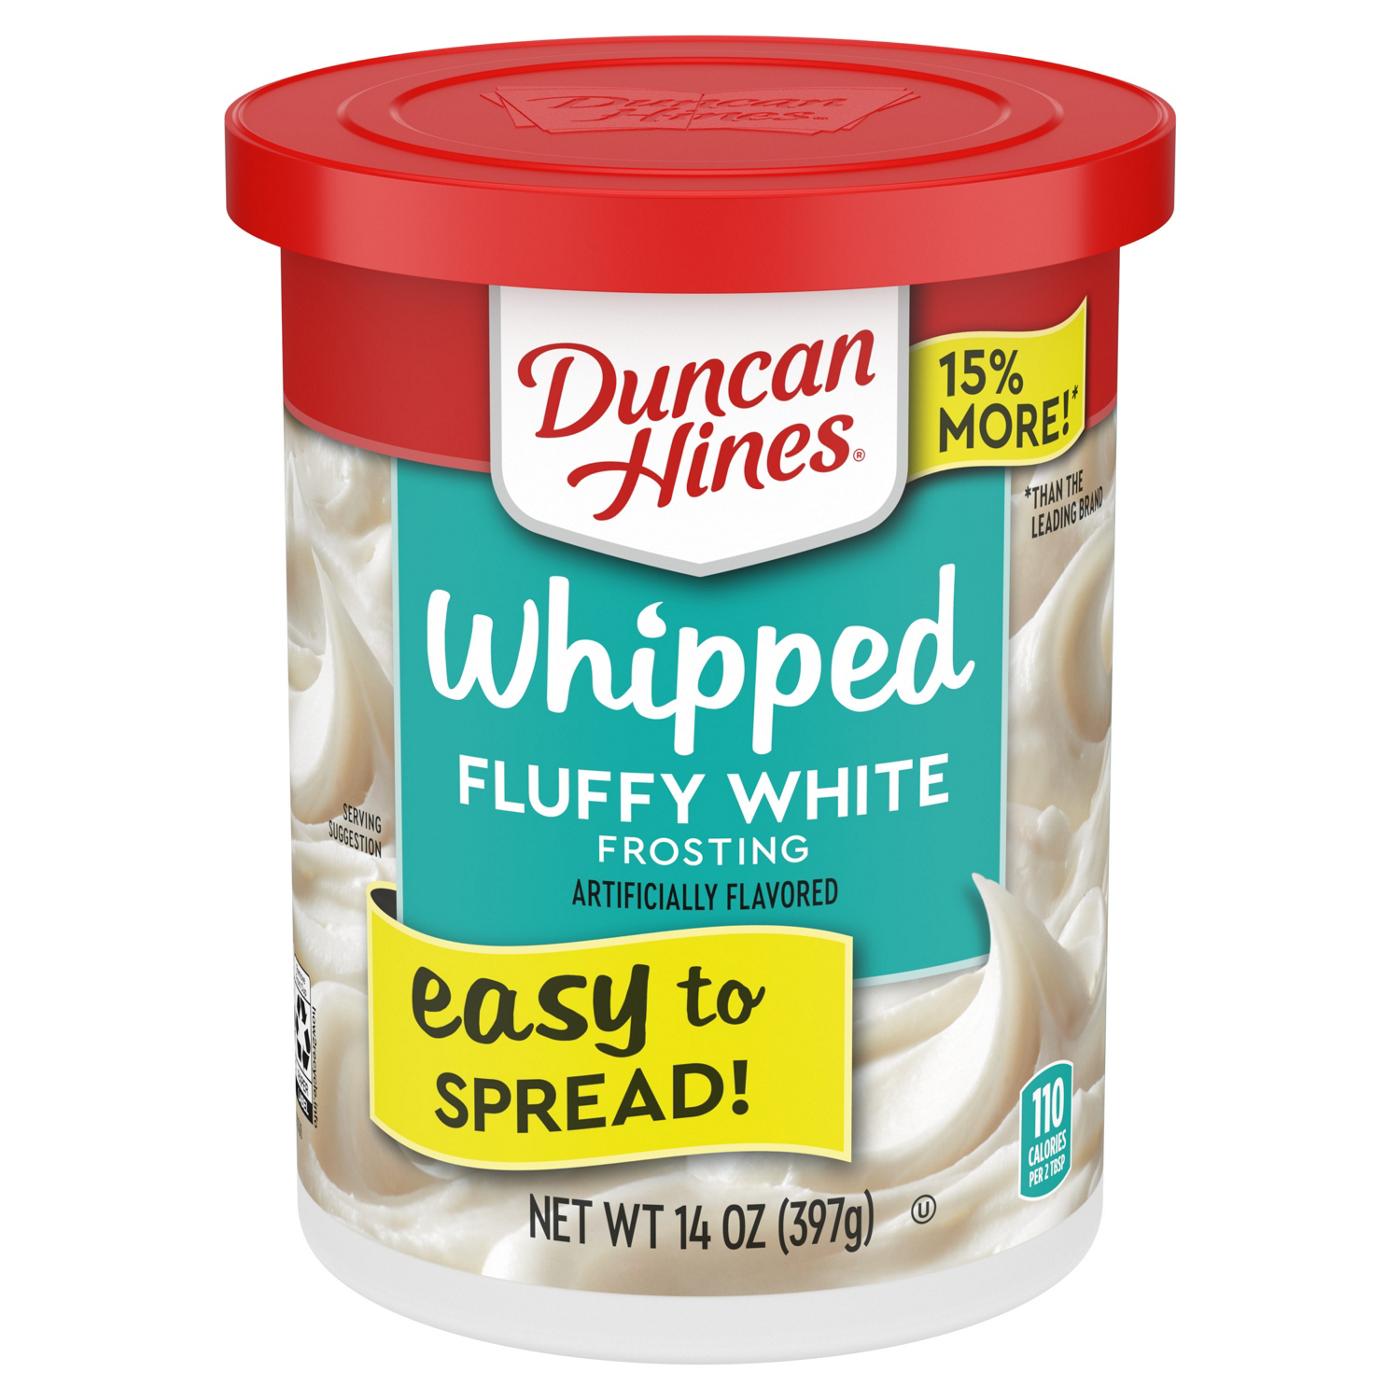 Duncan Hines Whipped White Frosting; image 1 of 7